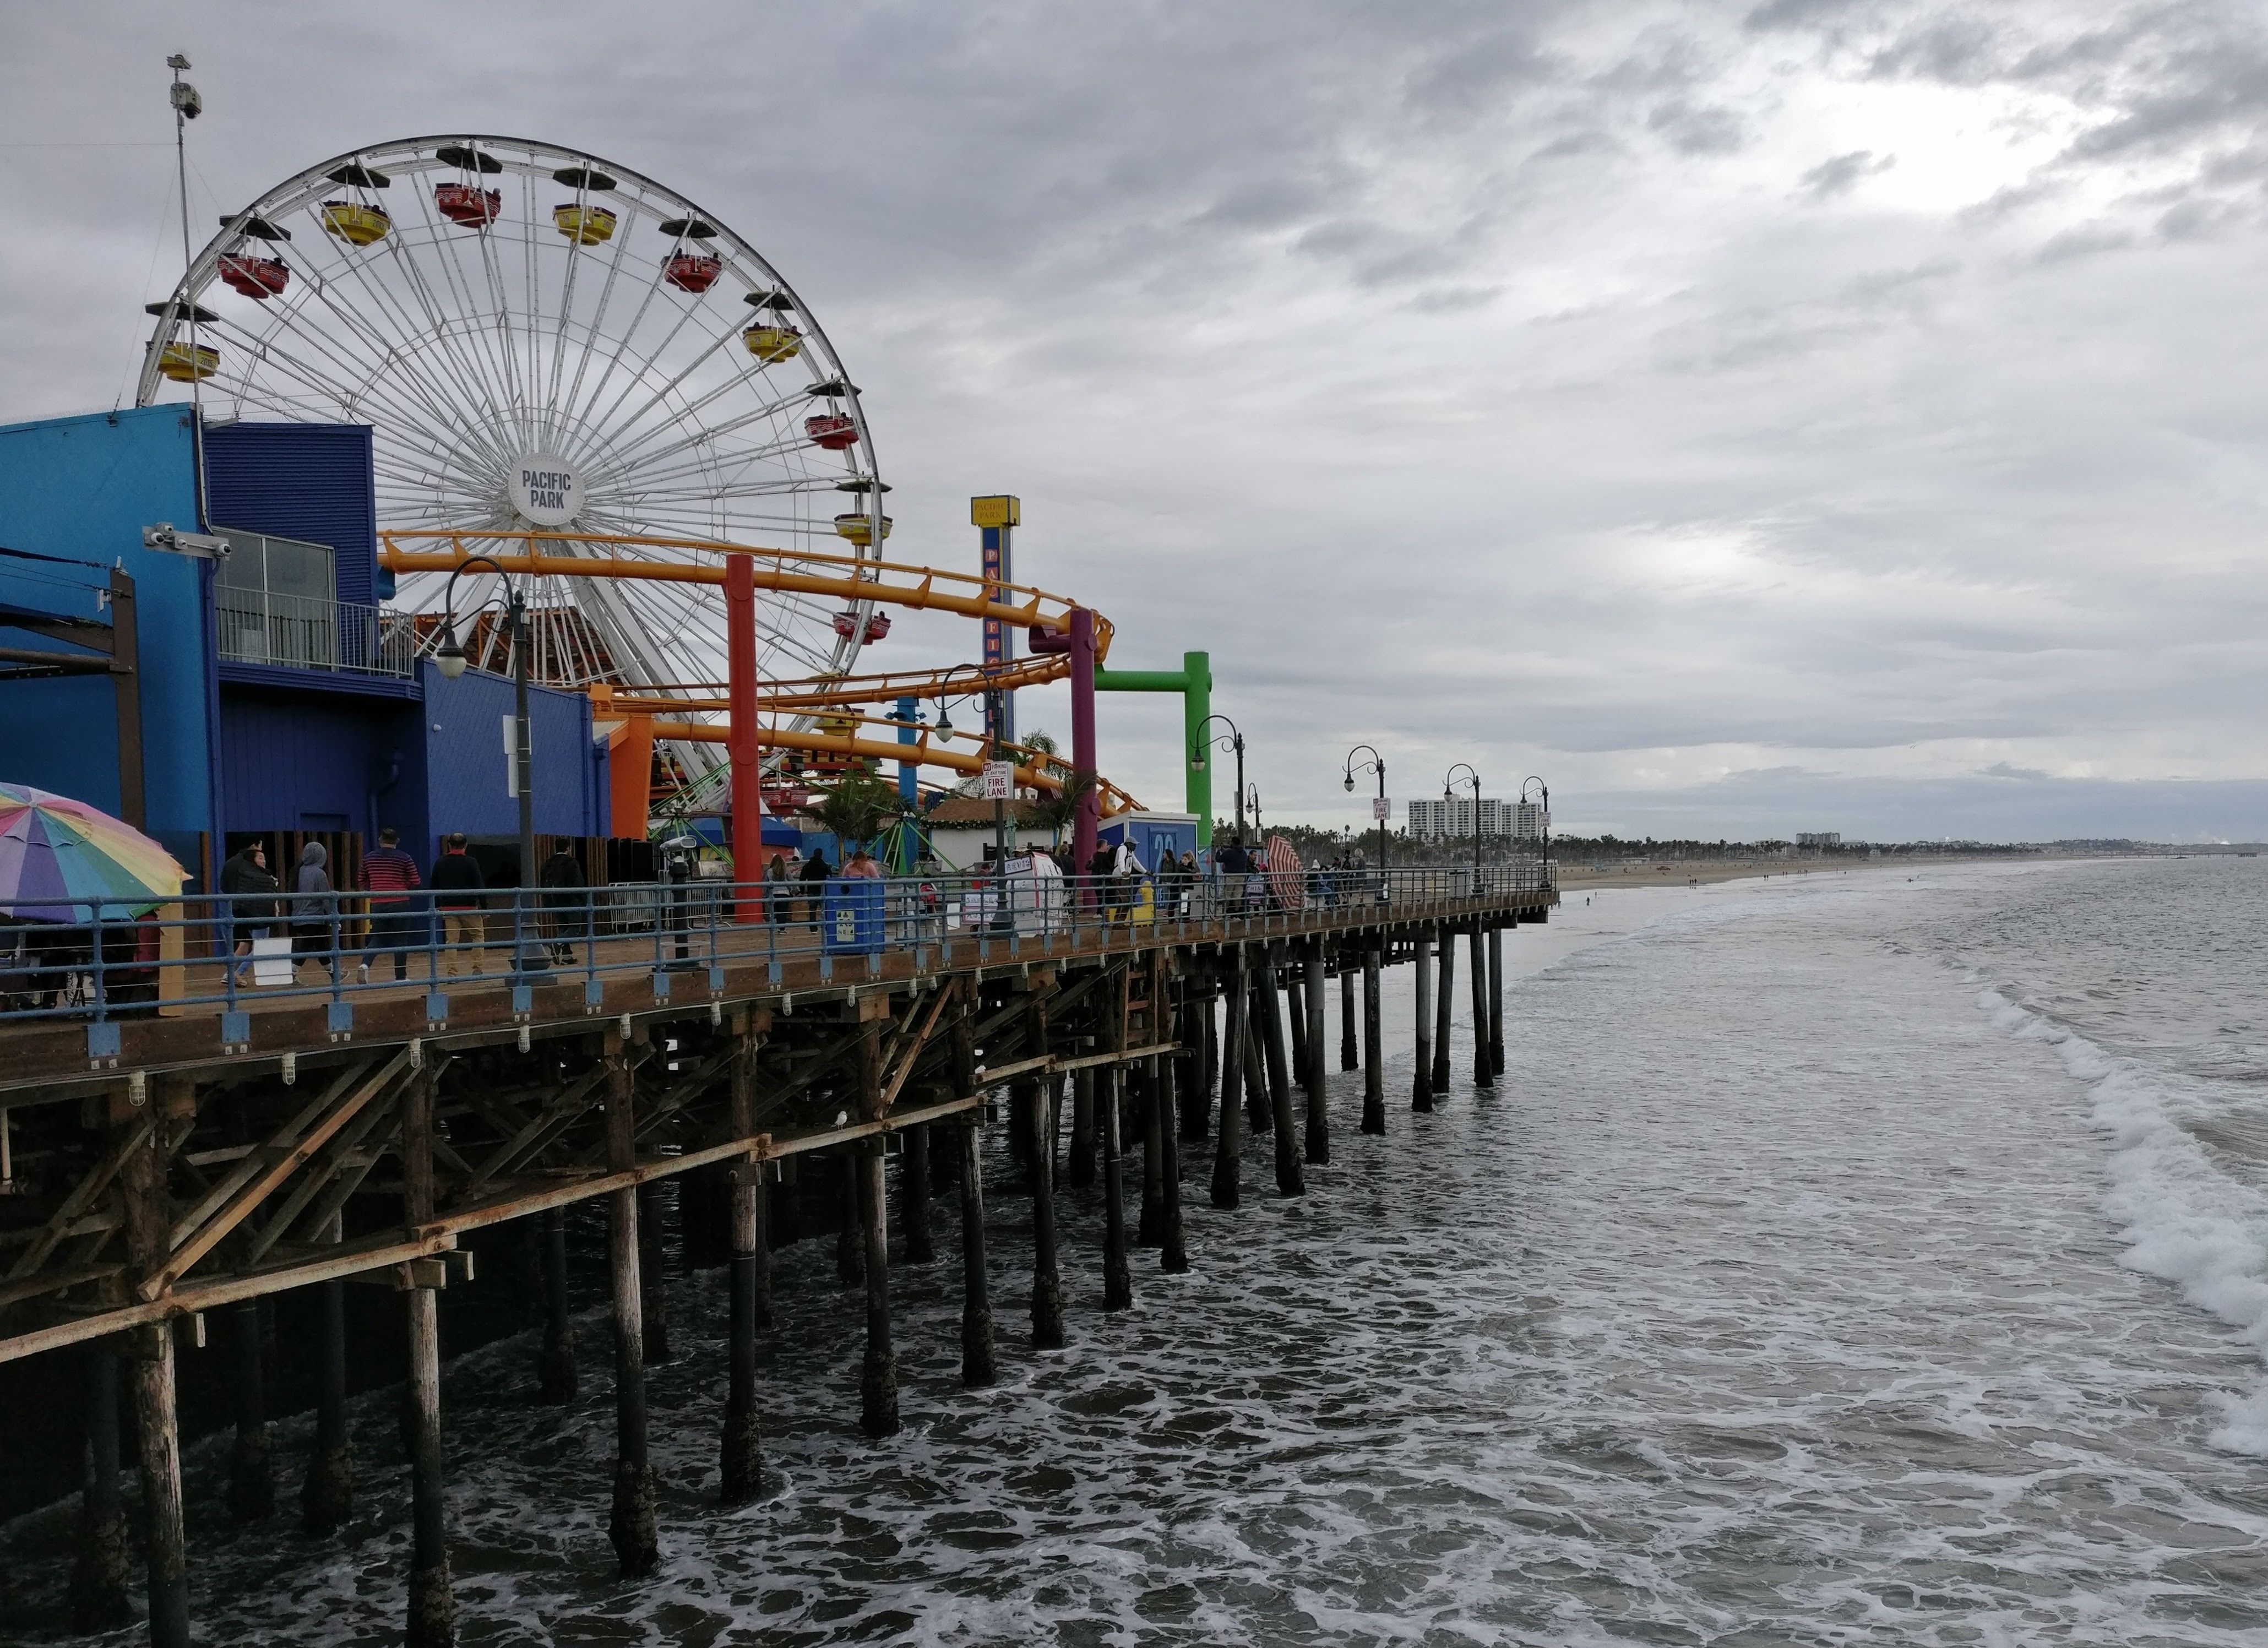 Caption: A photo of a ferris wheel, roller coaster, and other attractions at the pier at Santa Monica Pier Aquarium taken from the water in Santa Monica, California. (Local Guide Rholais Lii)